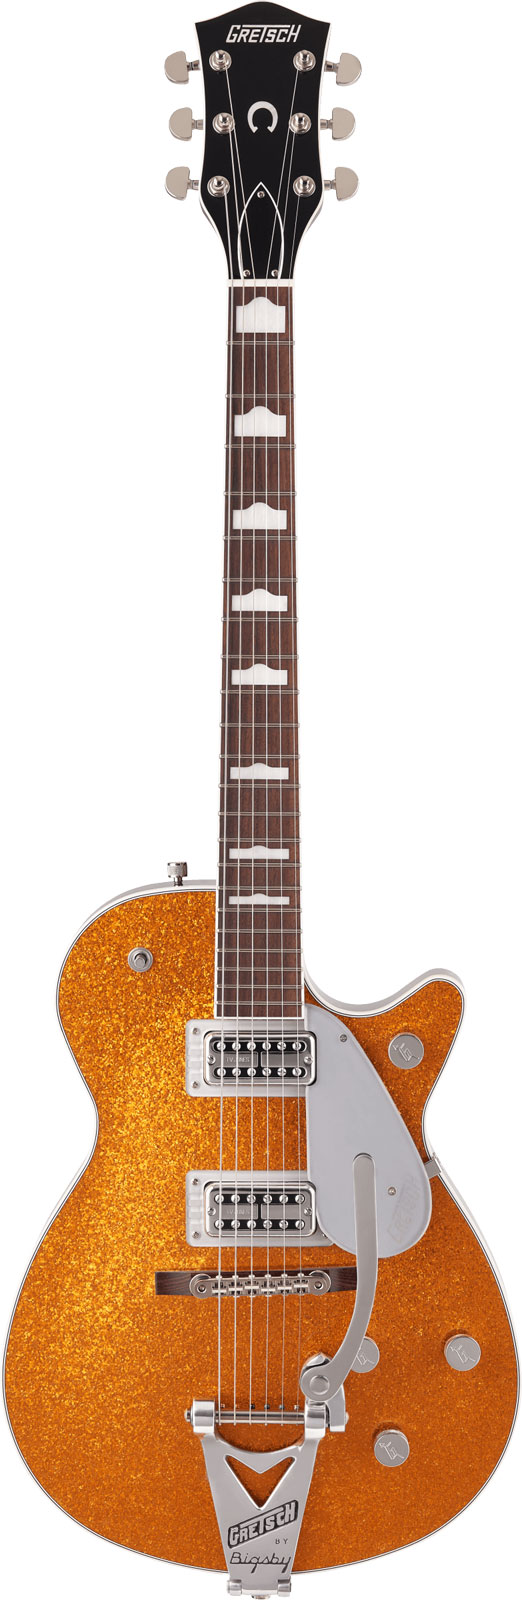 GRETSCH GUITARS G6129T-89 VINTAGE SELECT '89 SPARKLE JET WITH BIGSBY RW, GOLD SPARKLE